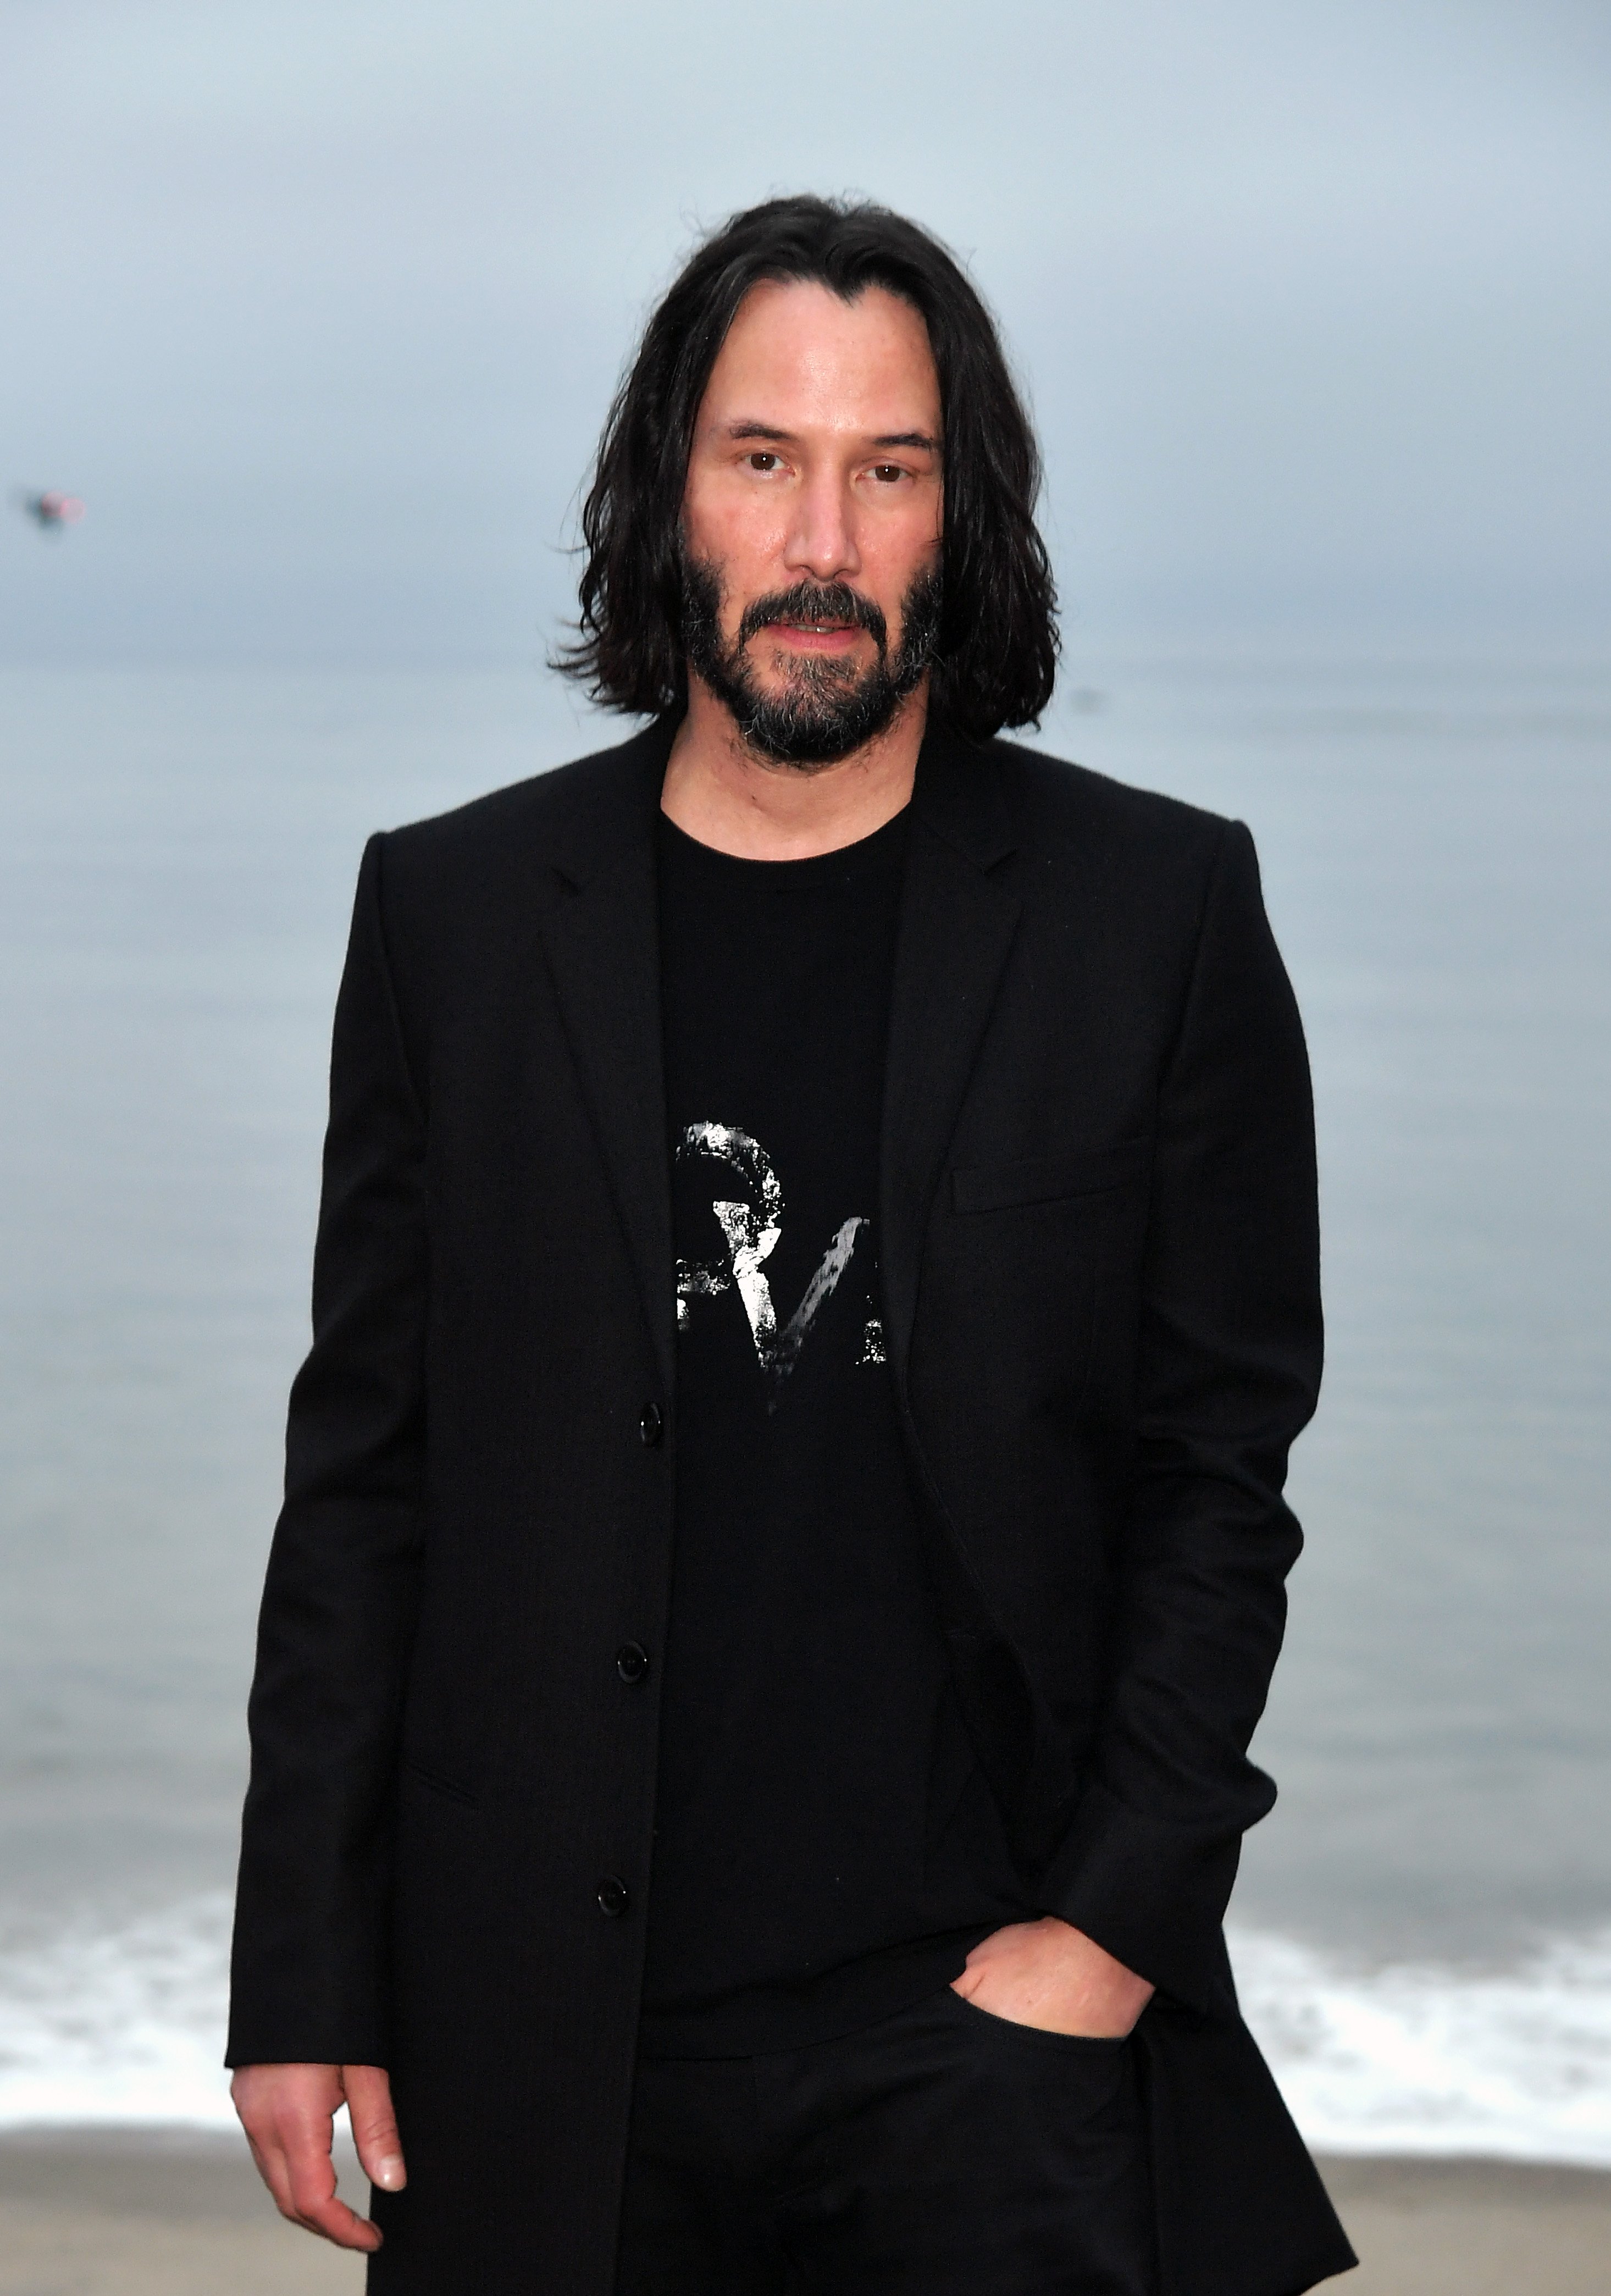 Keanu Reeves attends the Saint Laurent Mens Spring Summer 20 Show on June 6, 2019, in Paradise Cove Malibu, California. | Source: Getty Images